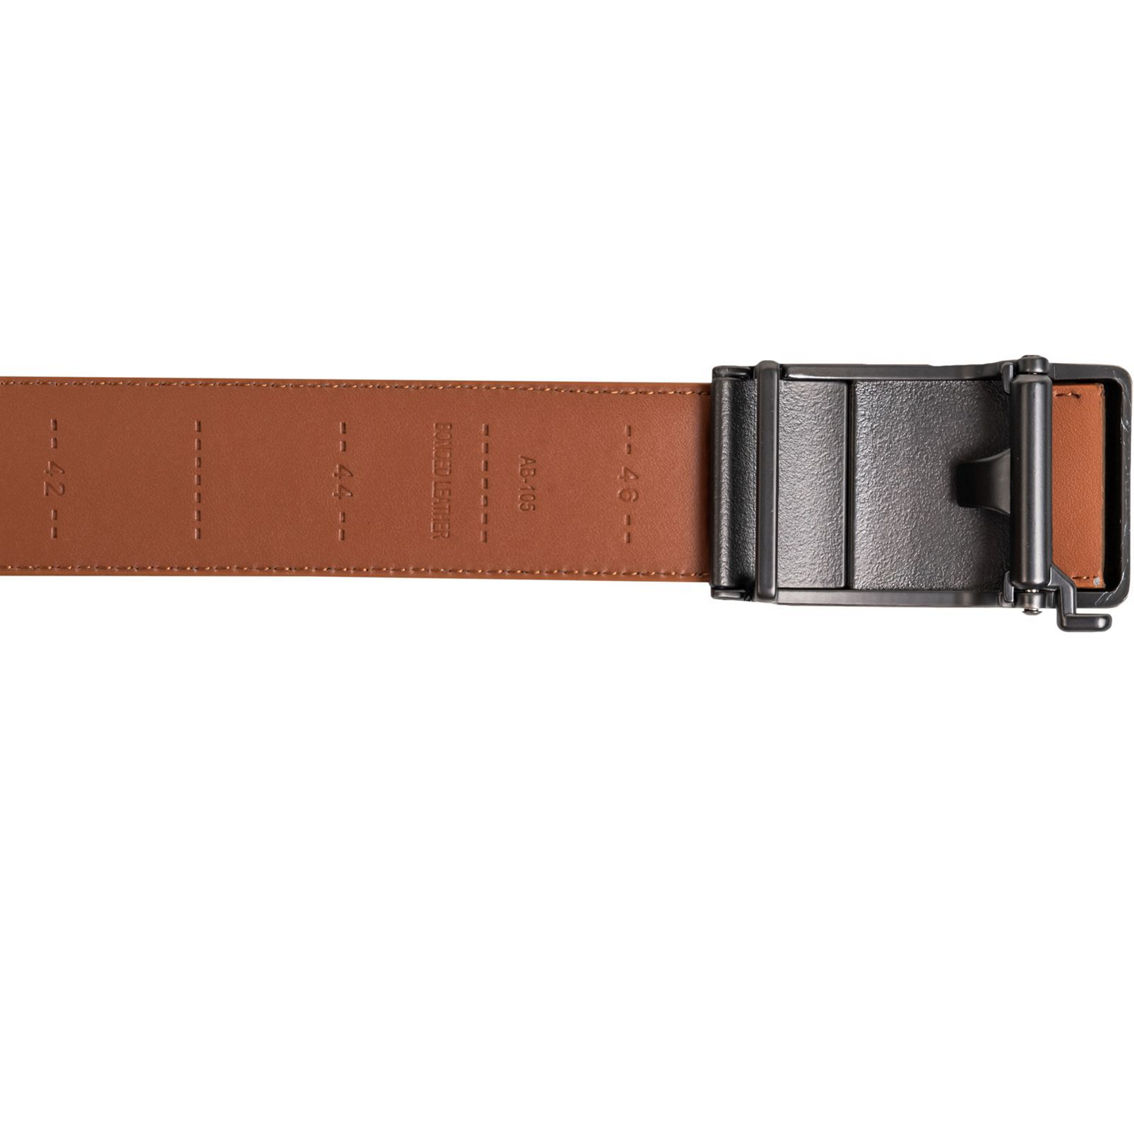 CHAMPS Men's Leather Automatic and Adjustable Belt, Tan - Image 4 of 5